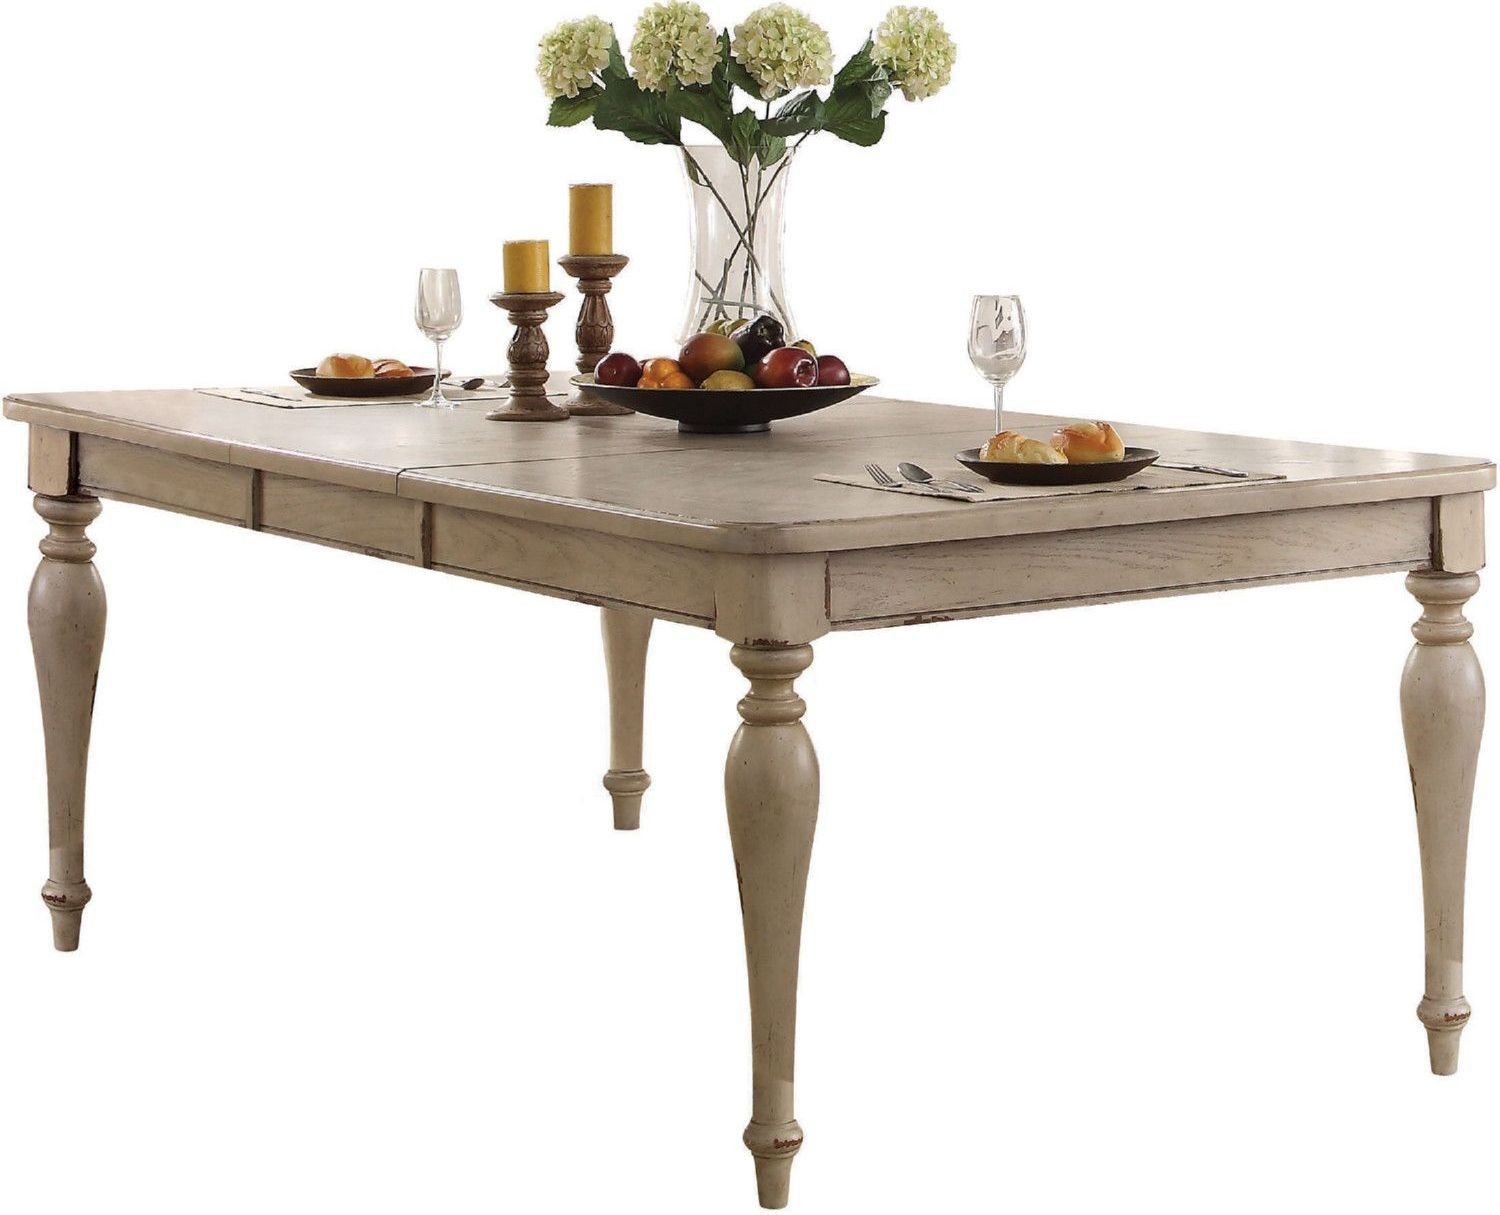 Abelin Antique White Extendable Rectangular Dining Table Regarding Current White Rectangular Dining Tables (View 6 of 15)